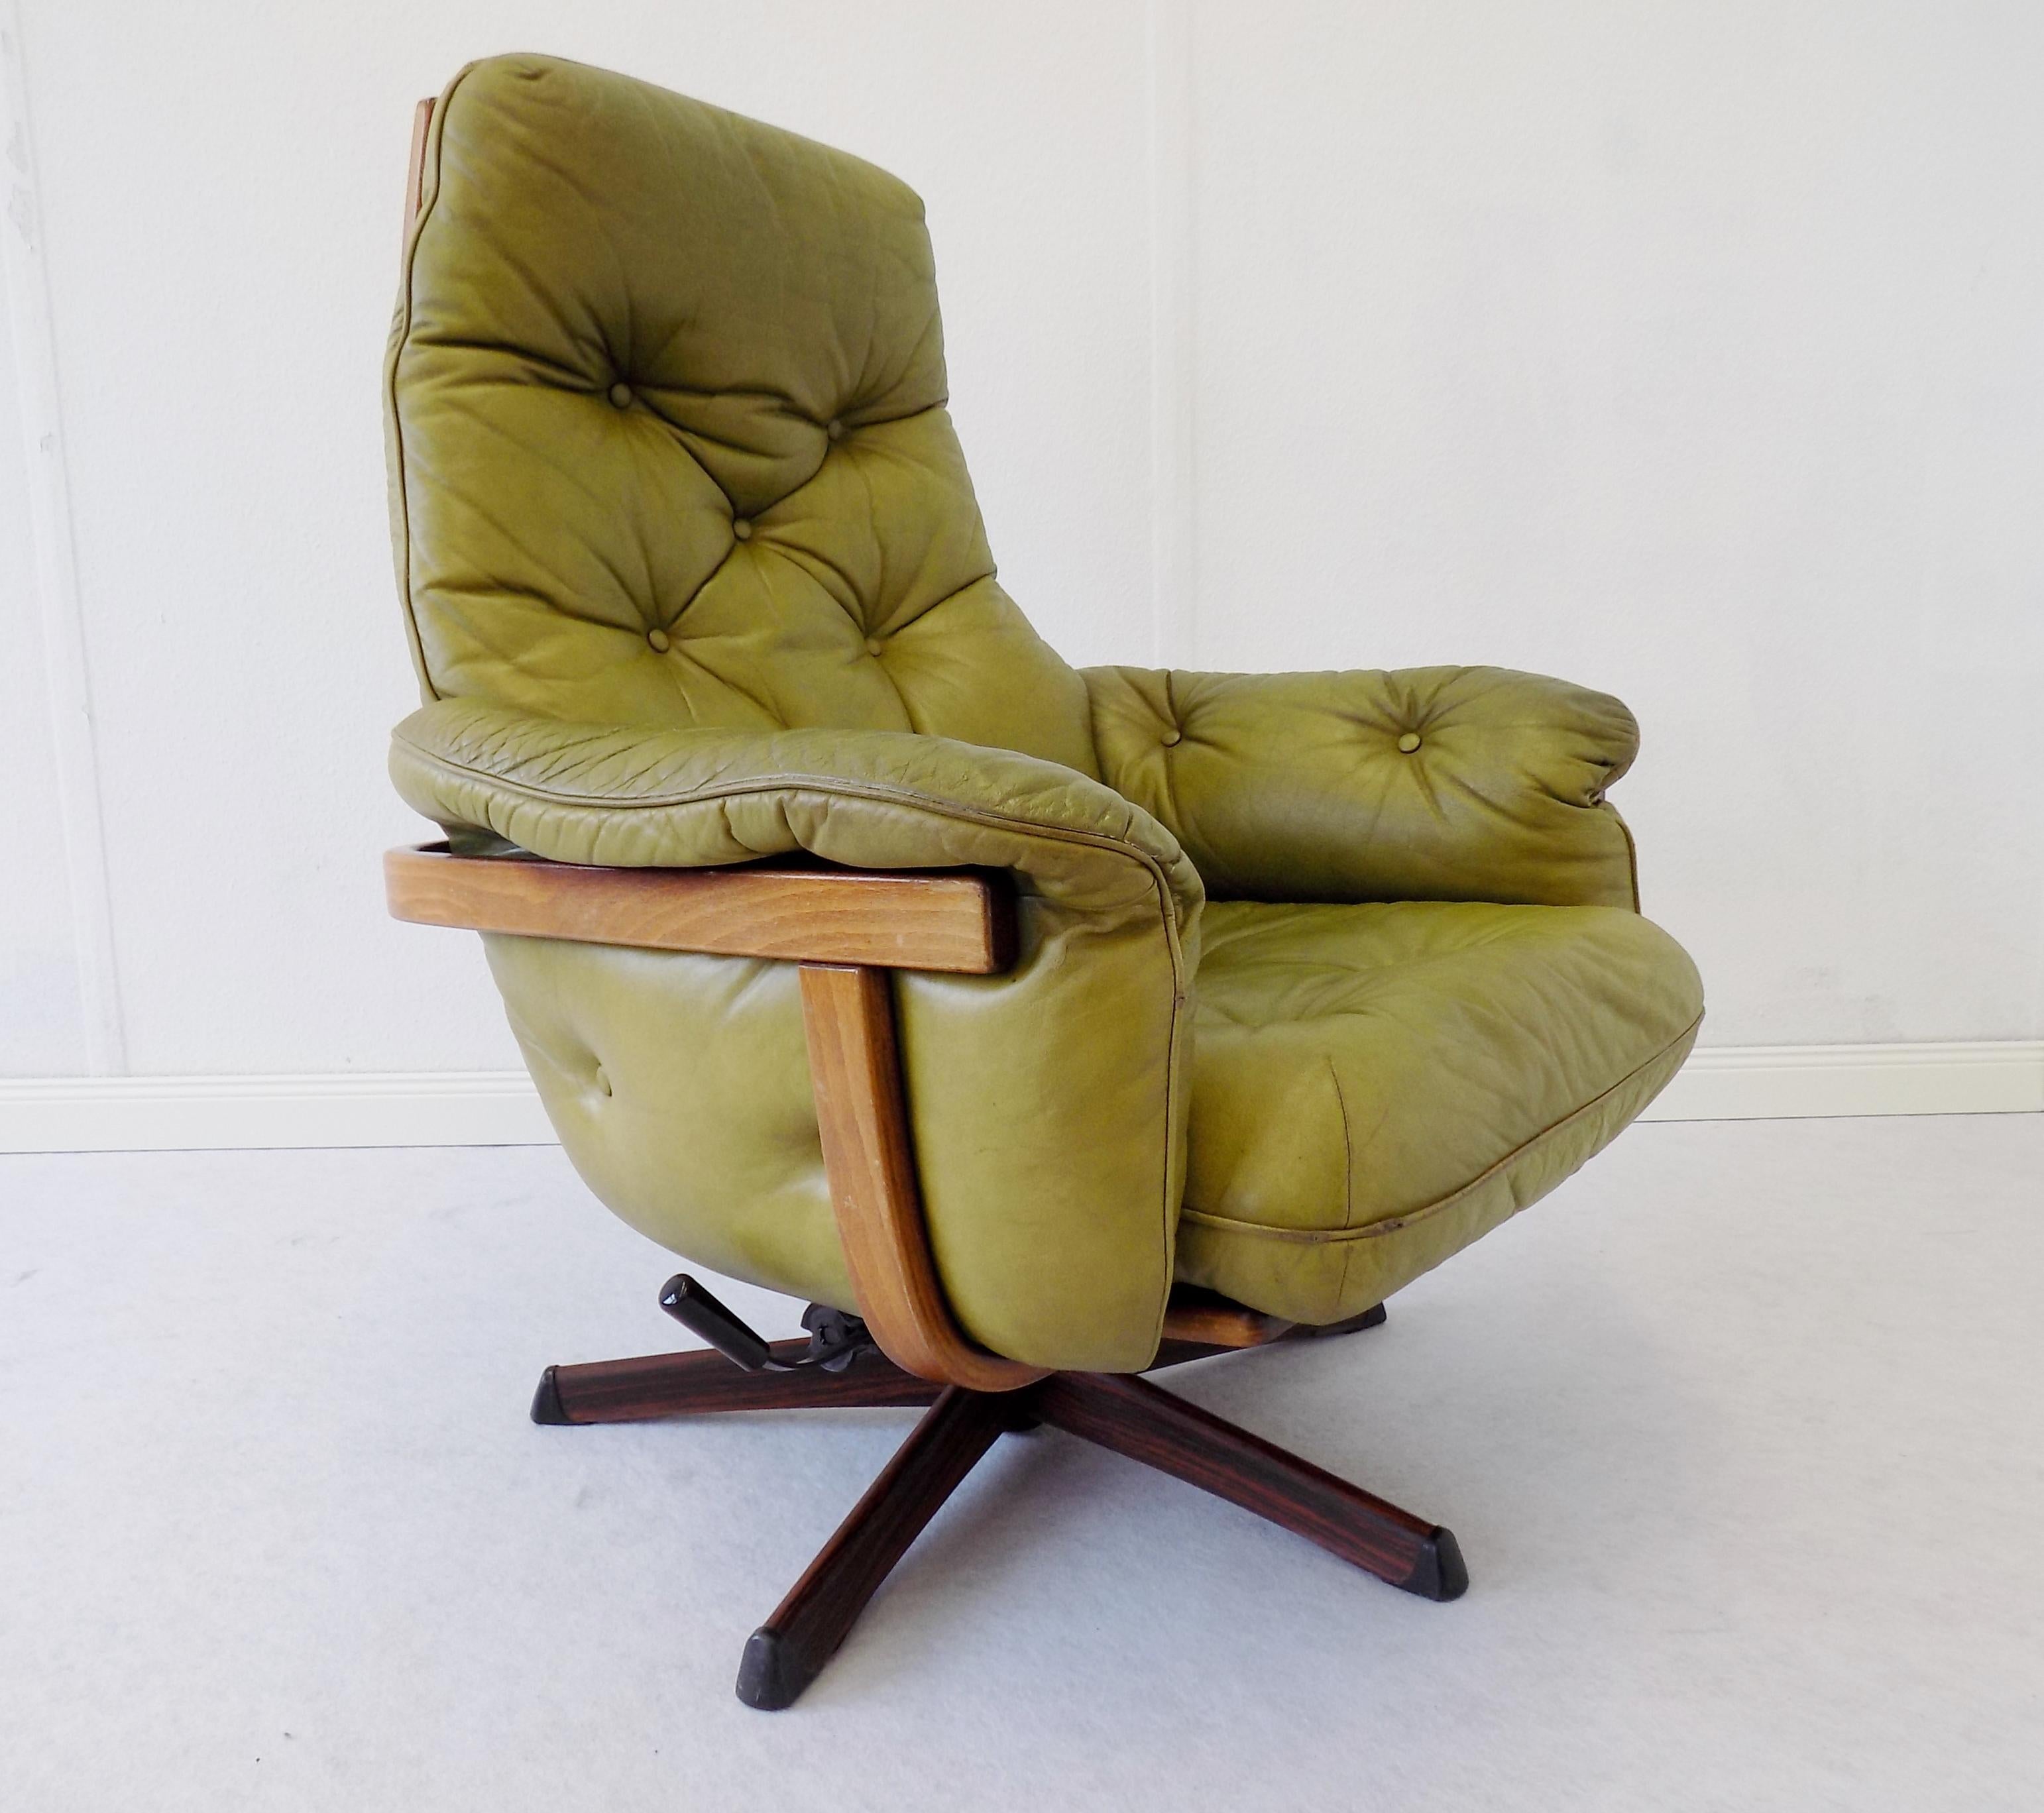 Typically 1970s green leather armchair from the Swedish manufacturer Göte Mobler. Leather is in good condition, only some usage signs on the corner of the seat cushion, the woodframe shows some small scratches on the back. Base made of steel with